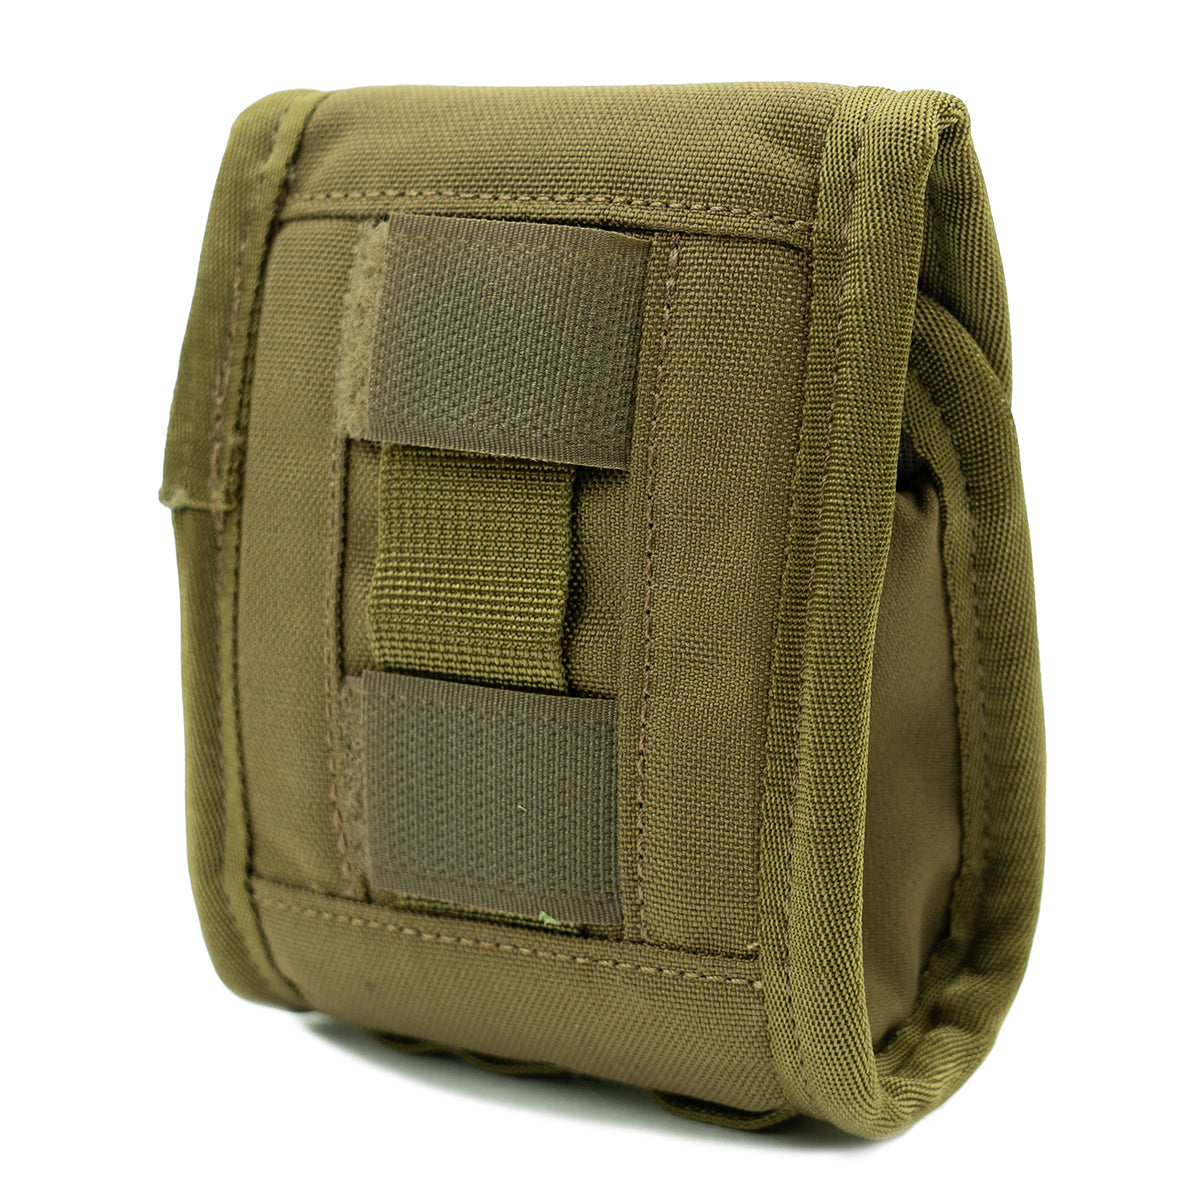 Shop for Mystery Ranch Quick Draw Rangefinder Pouch | GOHUNT